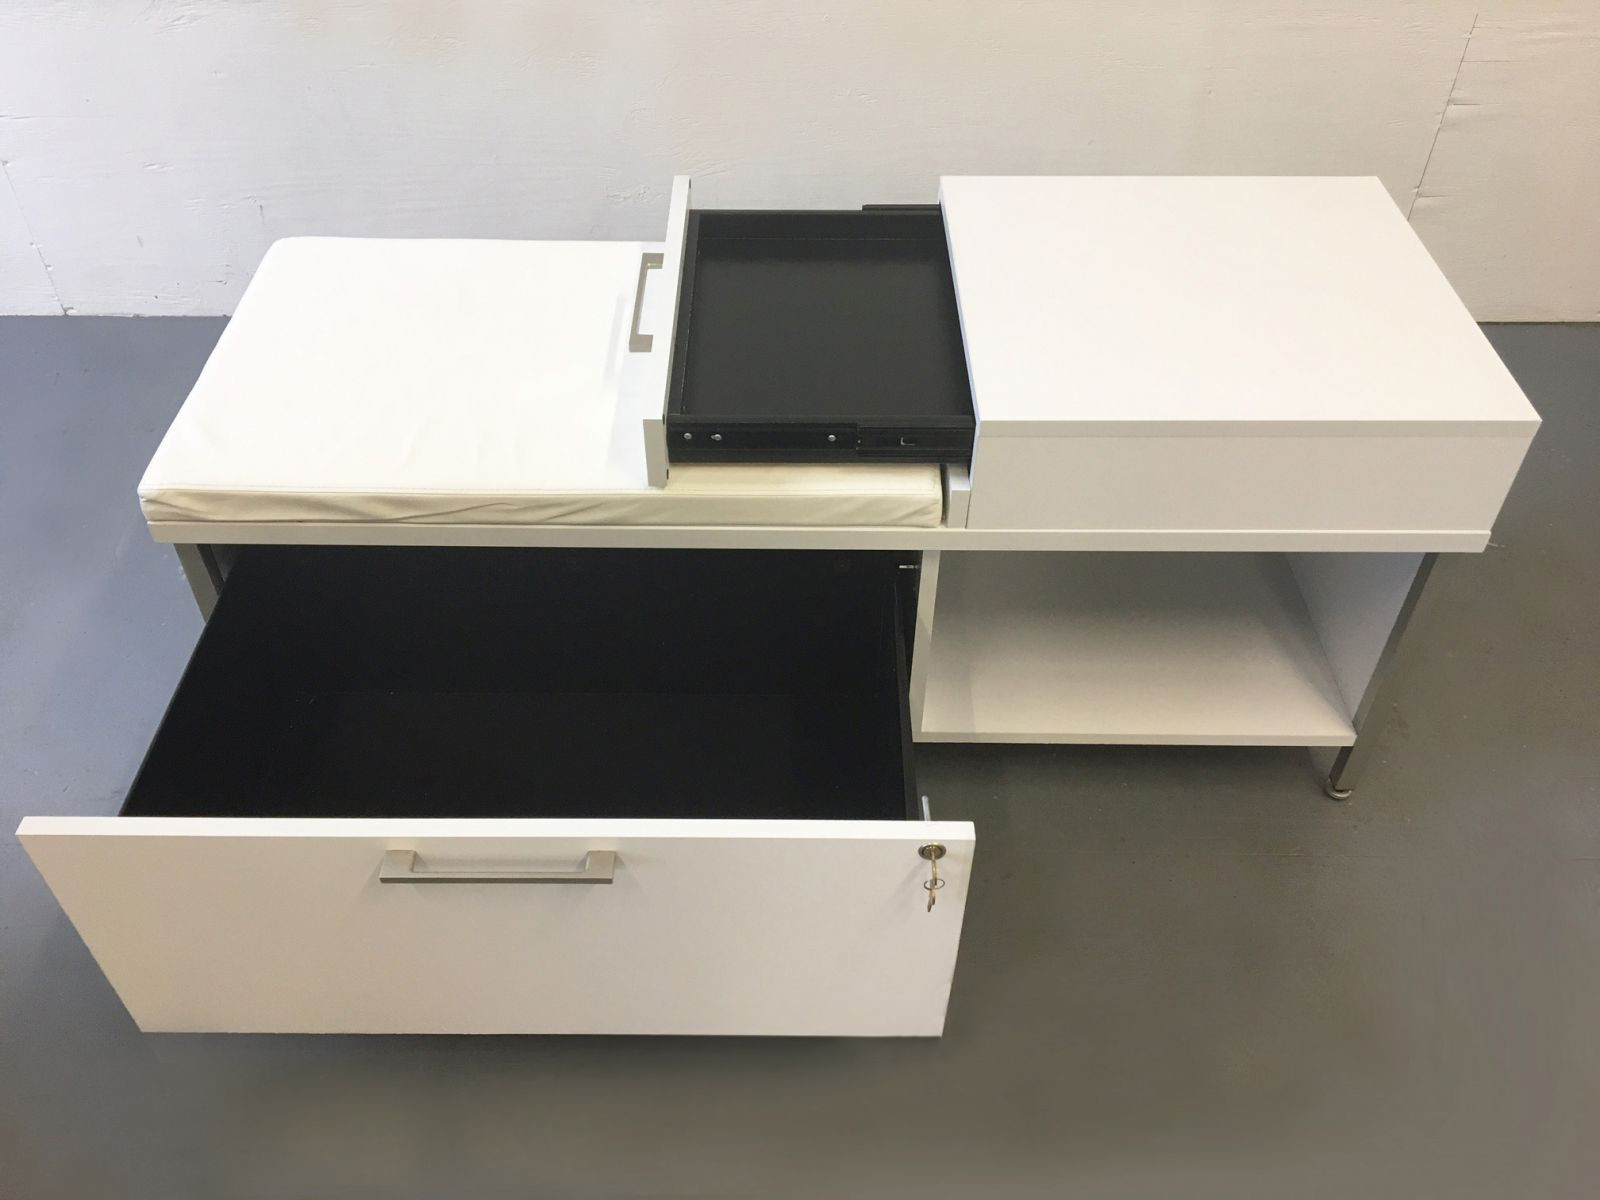 File Cabinet Storage Bench
 File & Storage Bench by Steelcase